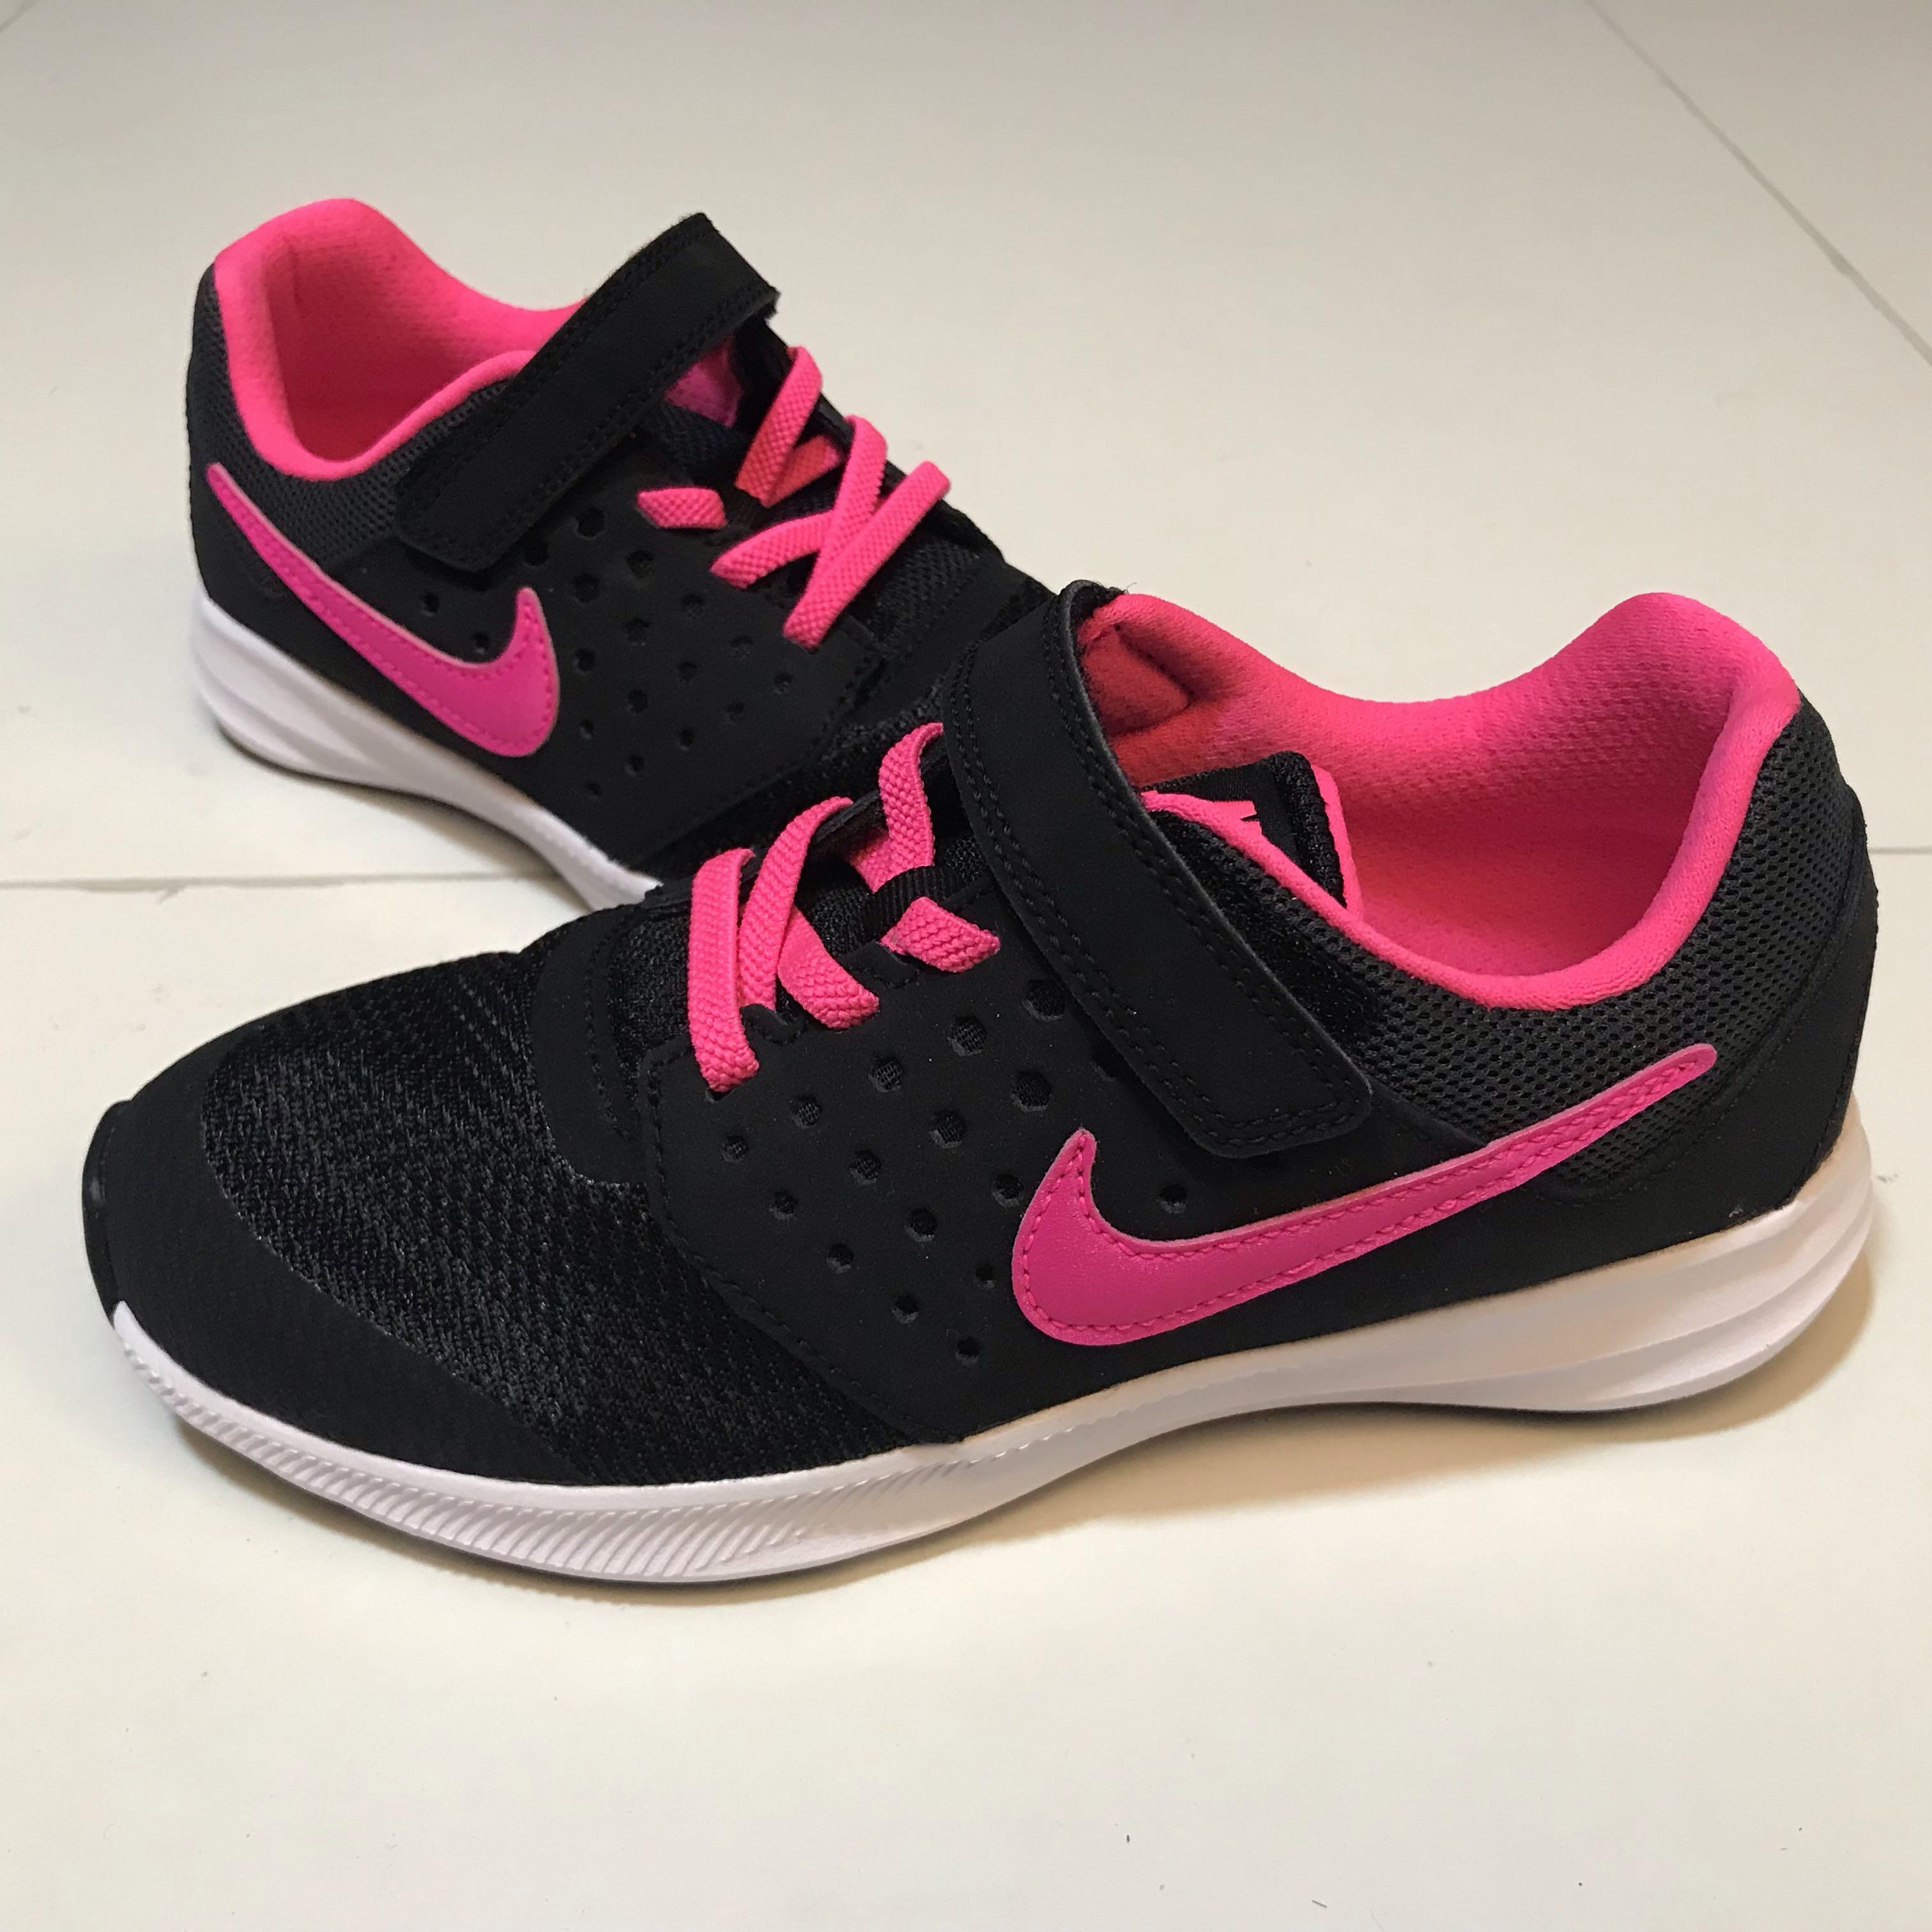 Nike Shoes Brand New for Girls, Babies 